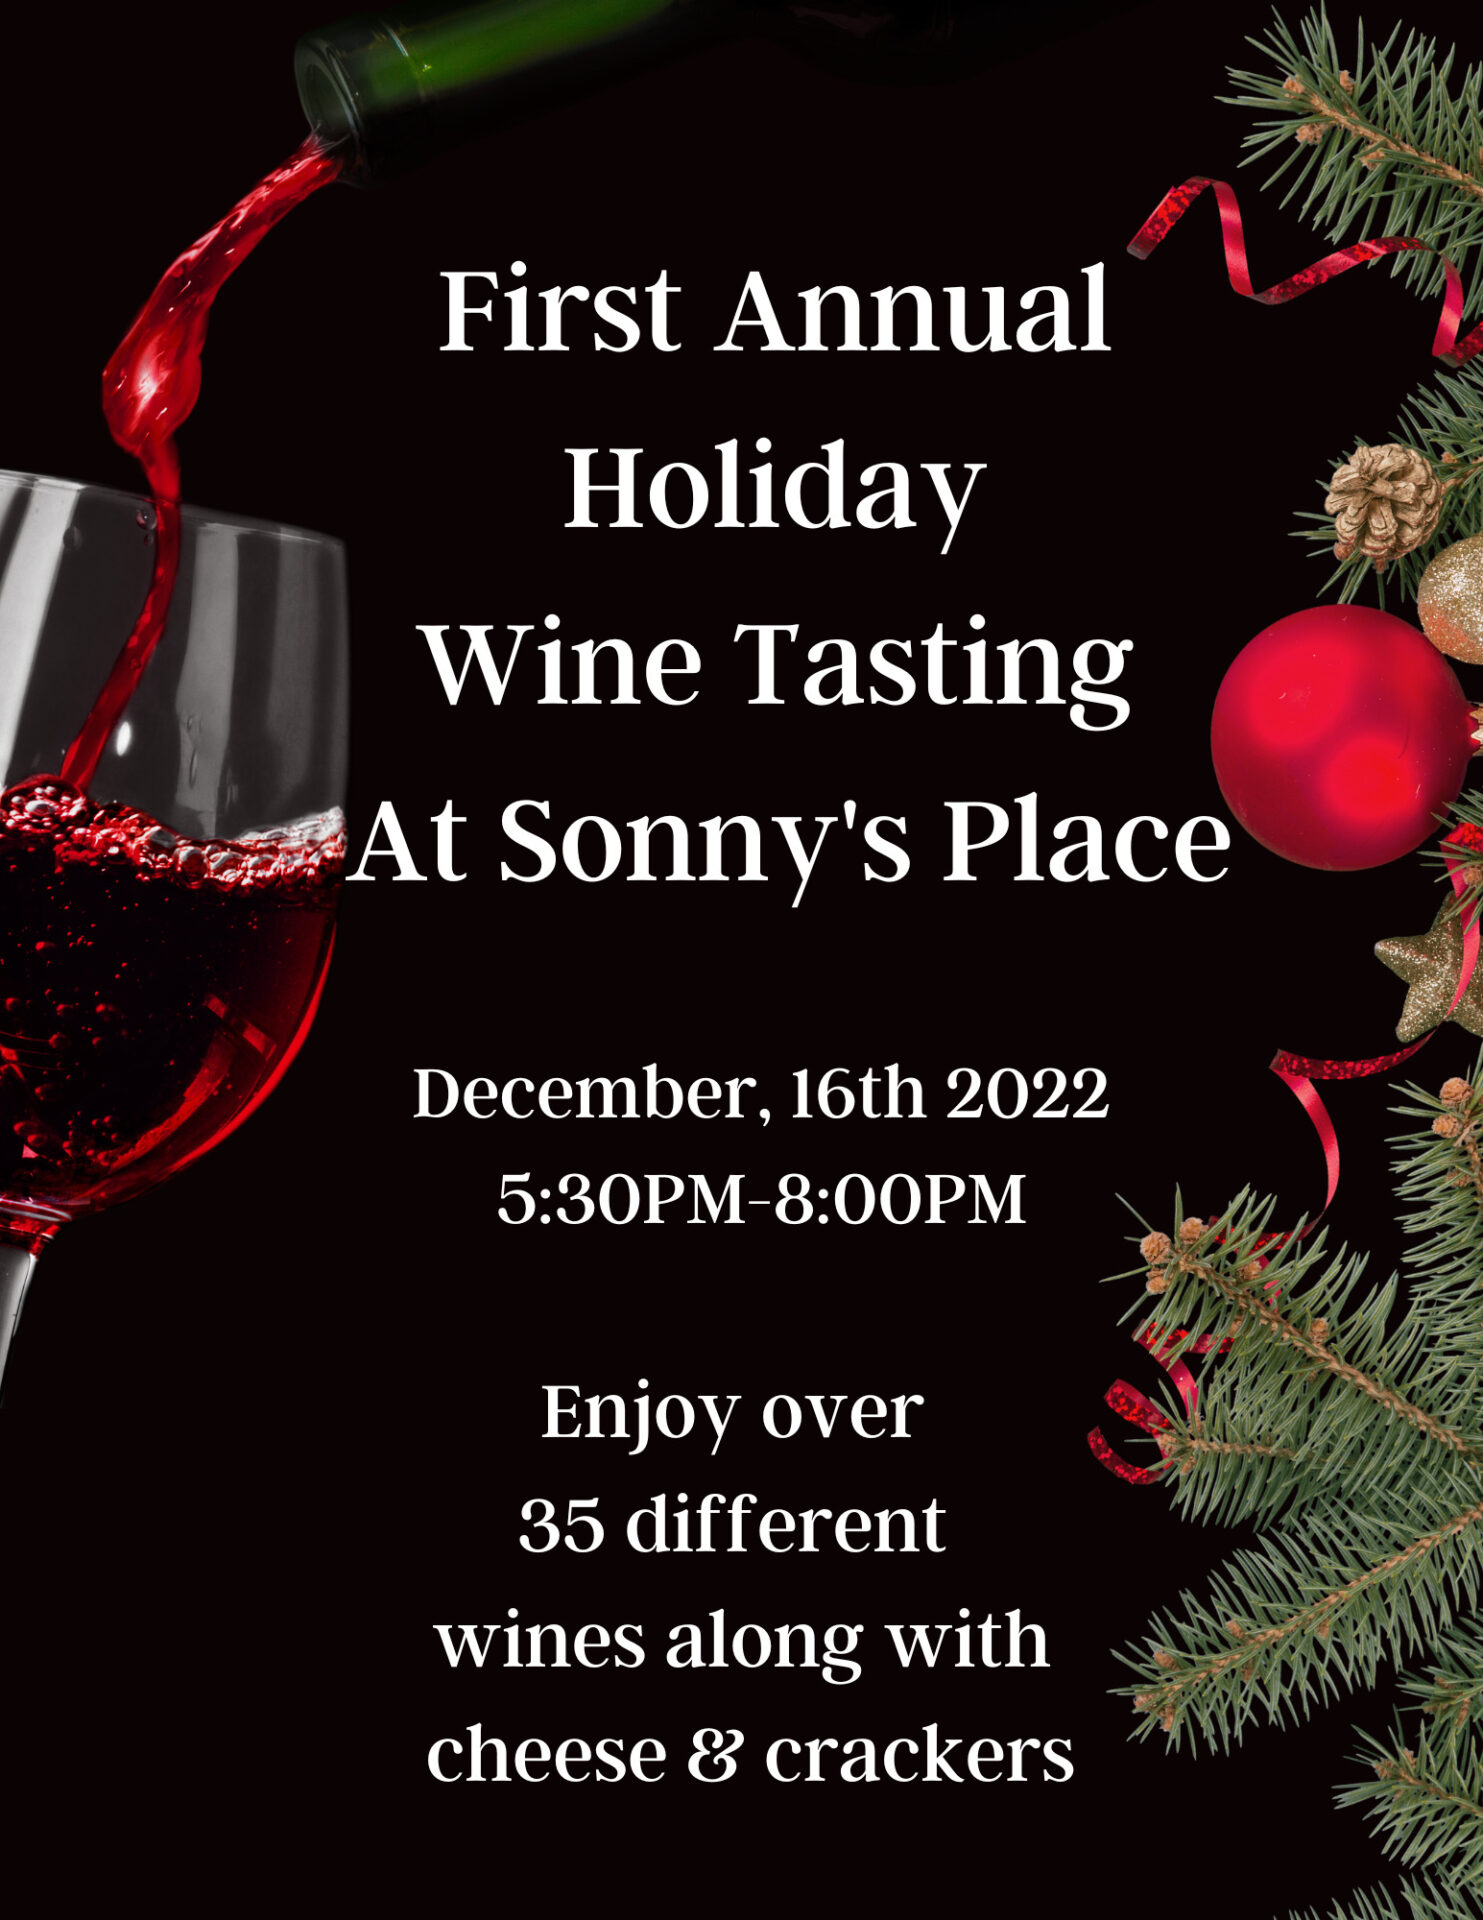 1st Annual Wine Tasting at Sonny's Place @ Sonnys Place